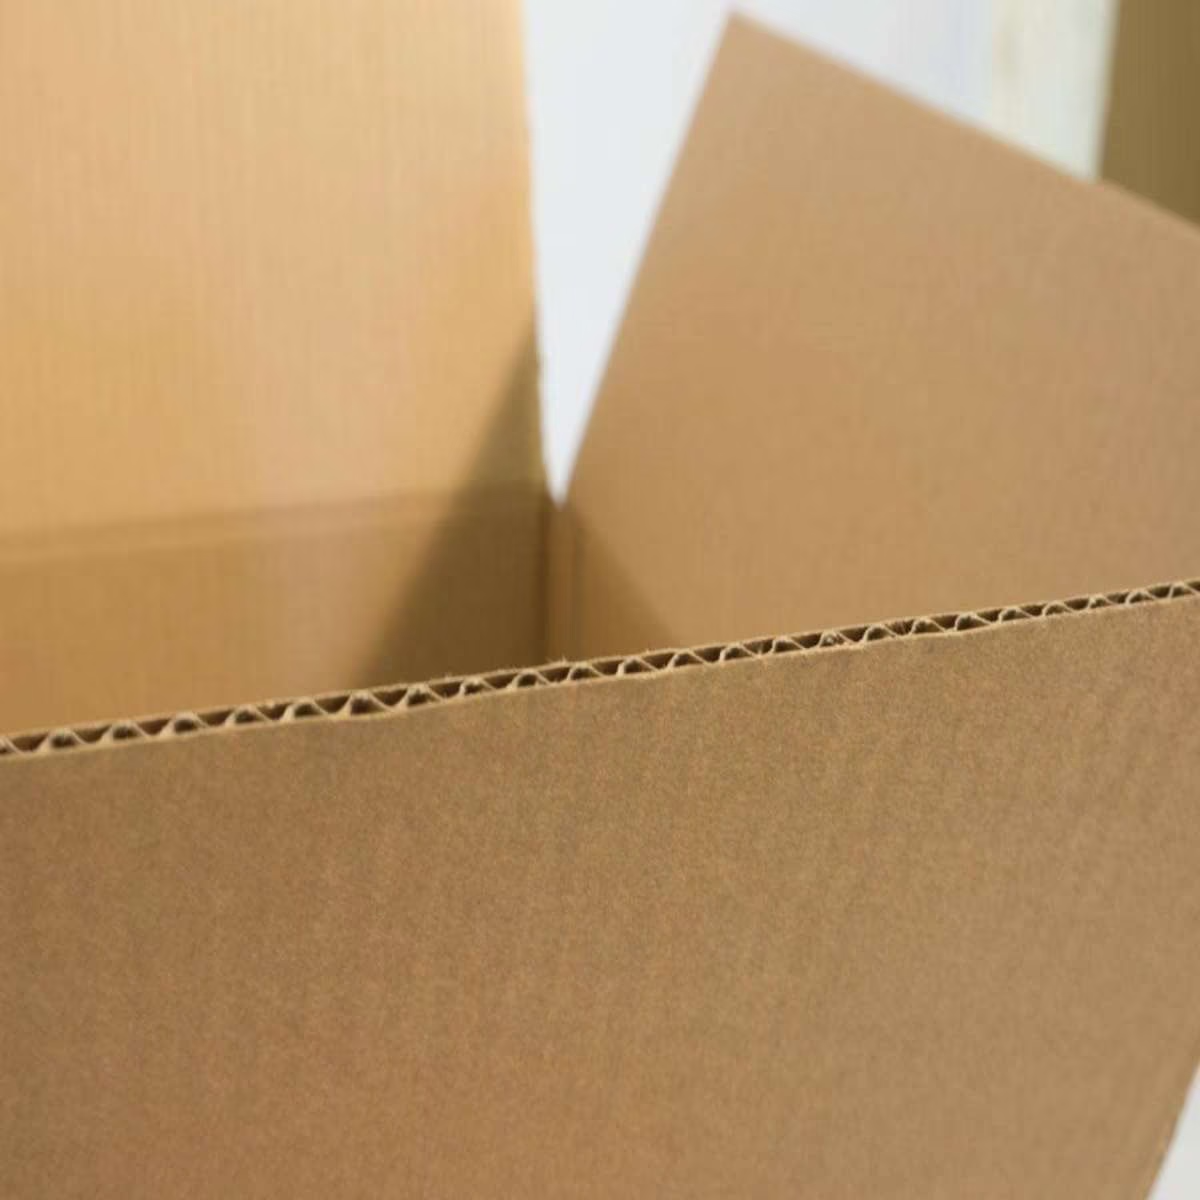 25 x Shipping Packing Boxes 382x260x360mm 100% Recycled AU Made -Same Day Post